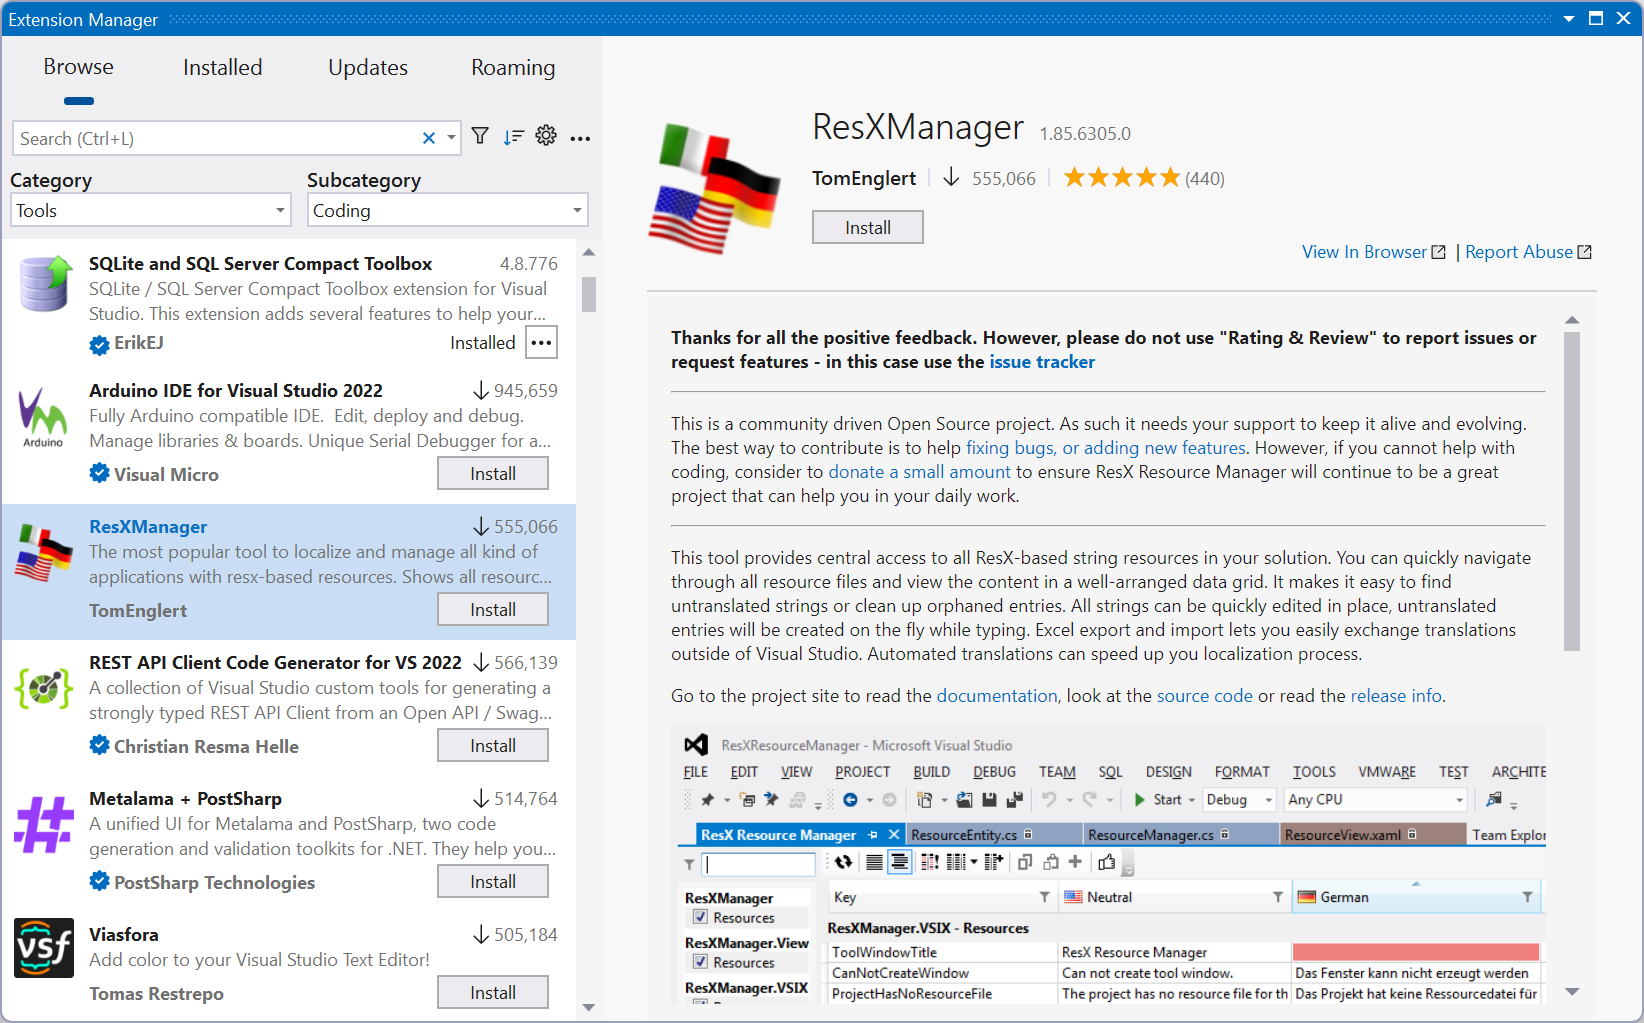 A screenshot of the new Extension Manager in Visual Studio opened to the Browse tab.